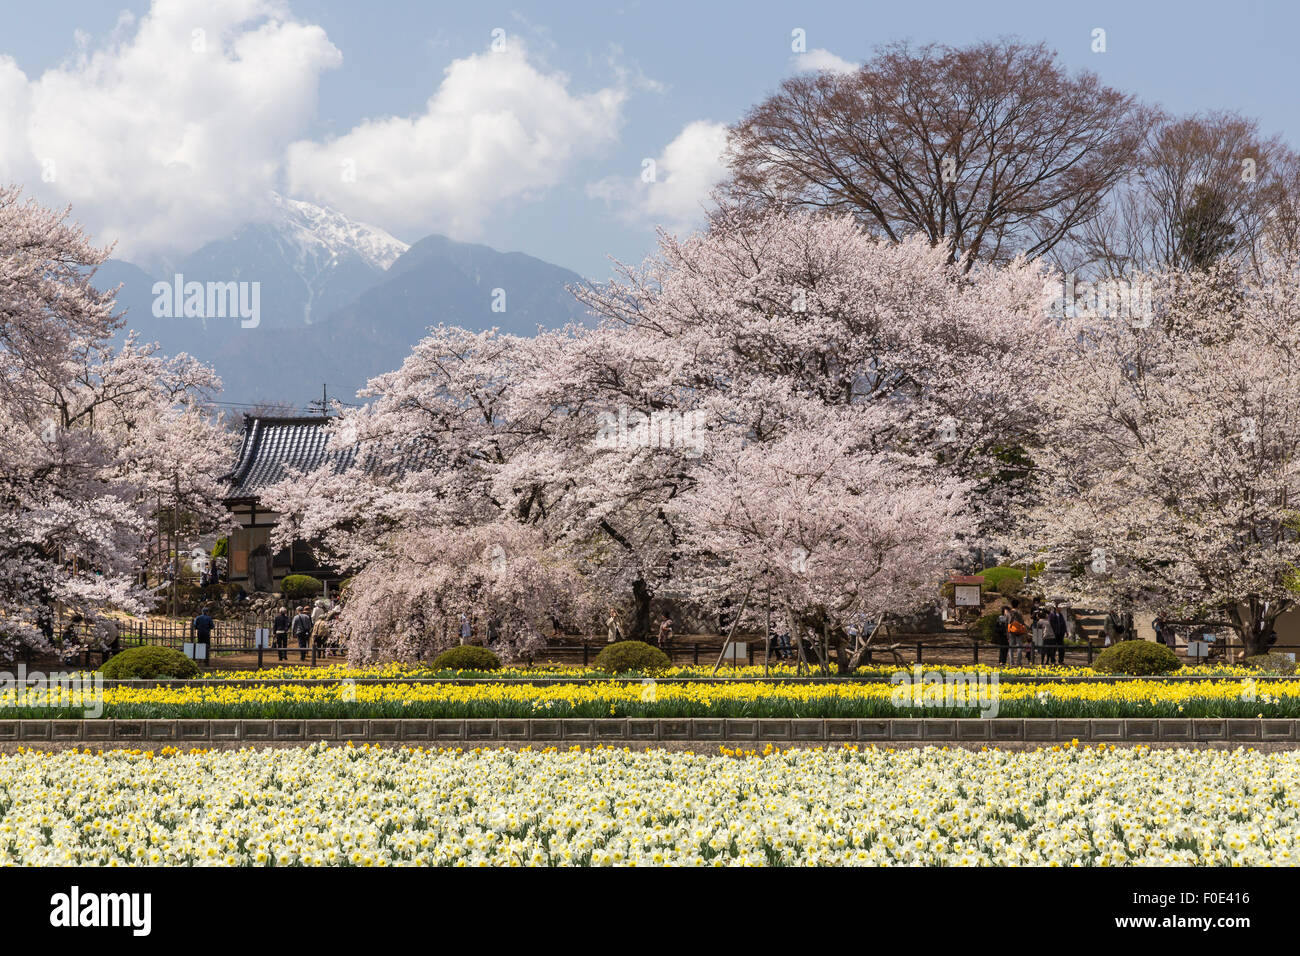 Cherry trees and snow capped mountain in Japan Stock Photo